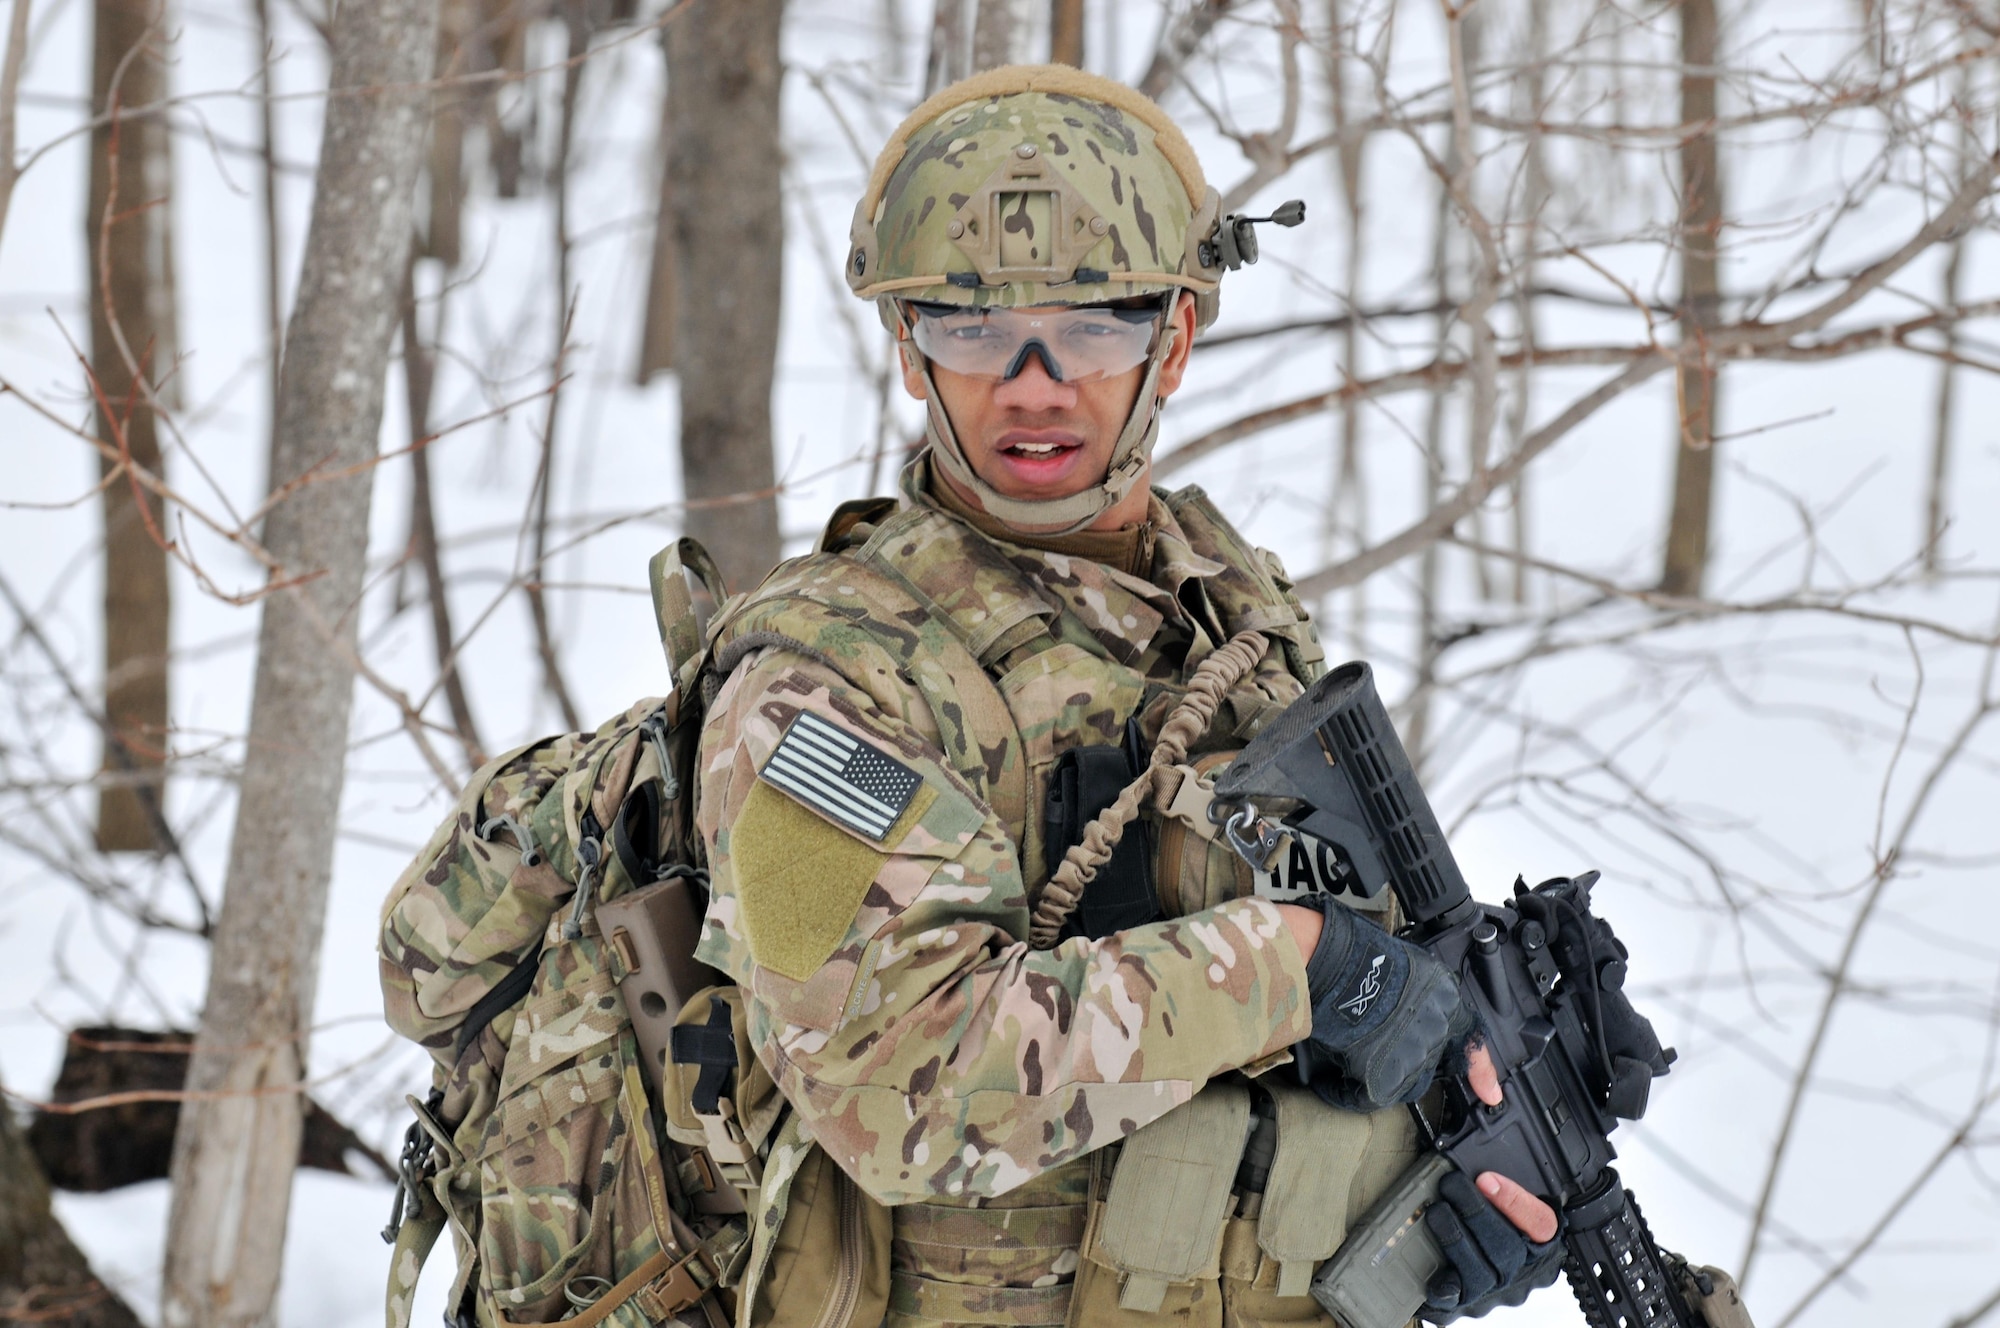 Senior Airman Joel Ramirez moves towards the objective training area during an exercise March 14, 2015, at Fort Drum, N.Y. Thirty Airmen from the New York Air National Guard’s 274th Air Support Operations Squadron (ASOS), based at Hancock Field Air National Guard Base trained on close air support (CAS) as well as training for the first time with two CH-47F Chinook helicopters from Company B, 3rd Battalion, 126th Aviation based in Rochester. The 274th mission is to advise commanders on how to best utilize U.S. and NATO assets for CAS. Ramirez is a tactical air control party (TACP) Airman. (New York Air National Guard photo/Master Sgt. Eric Miller)